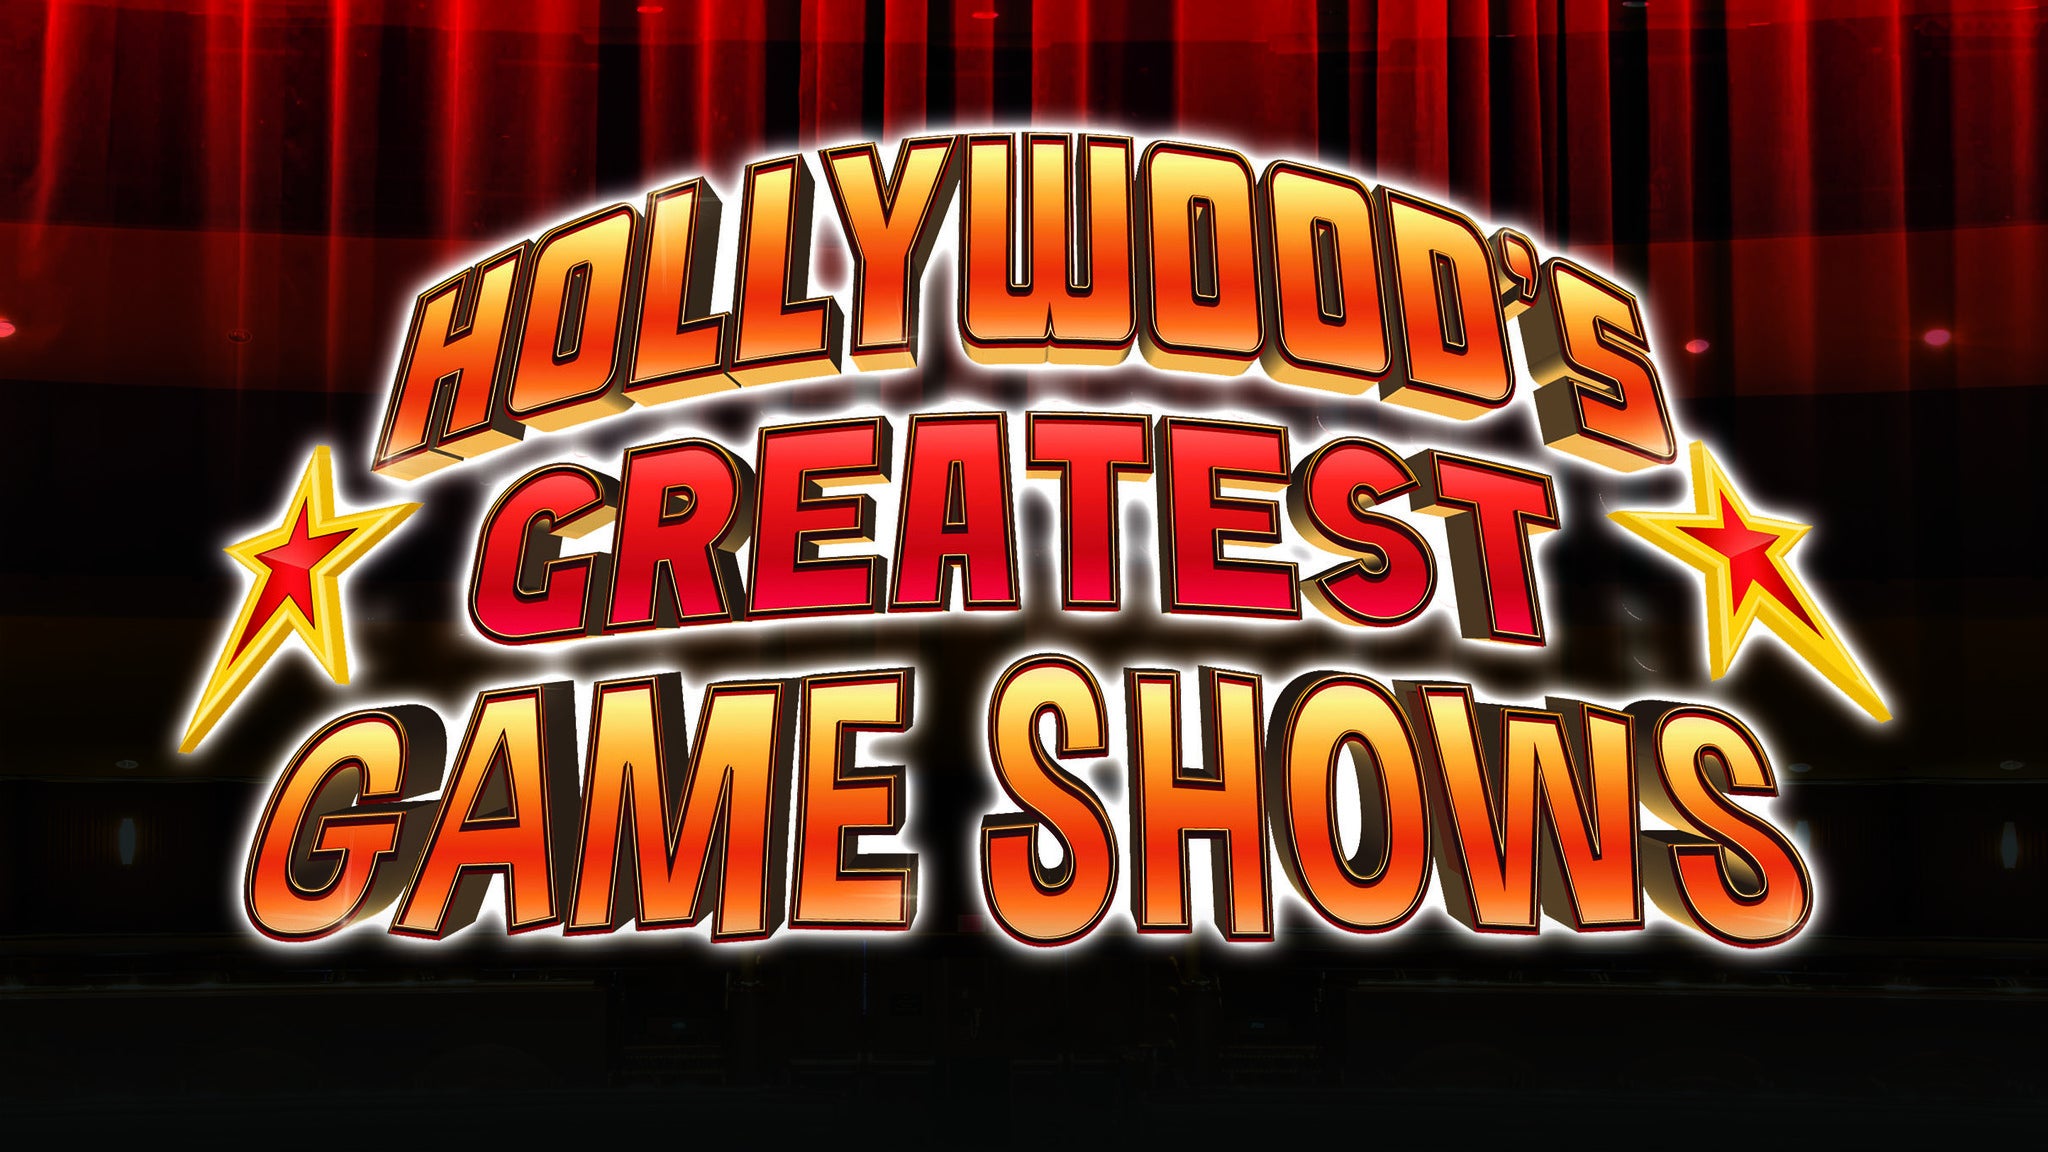 Hollywood's Greatest Game Shows in St Louis promo photo for Facebook presale offer code